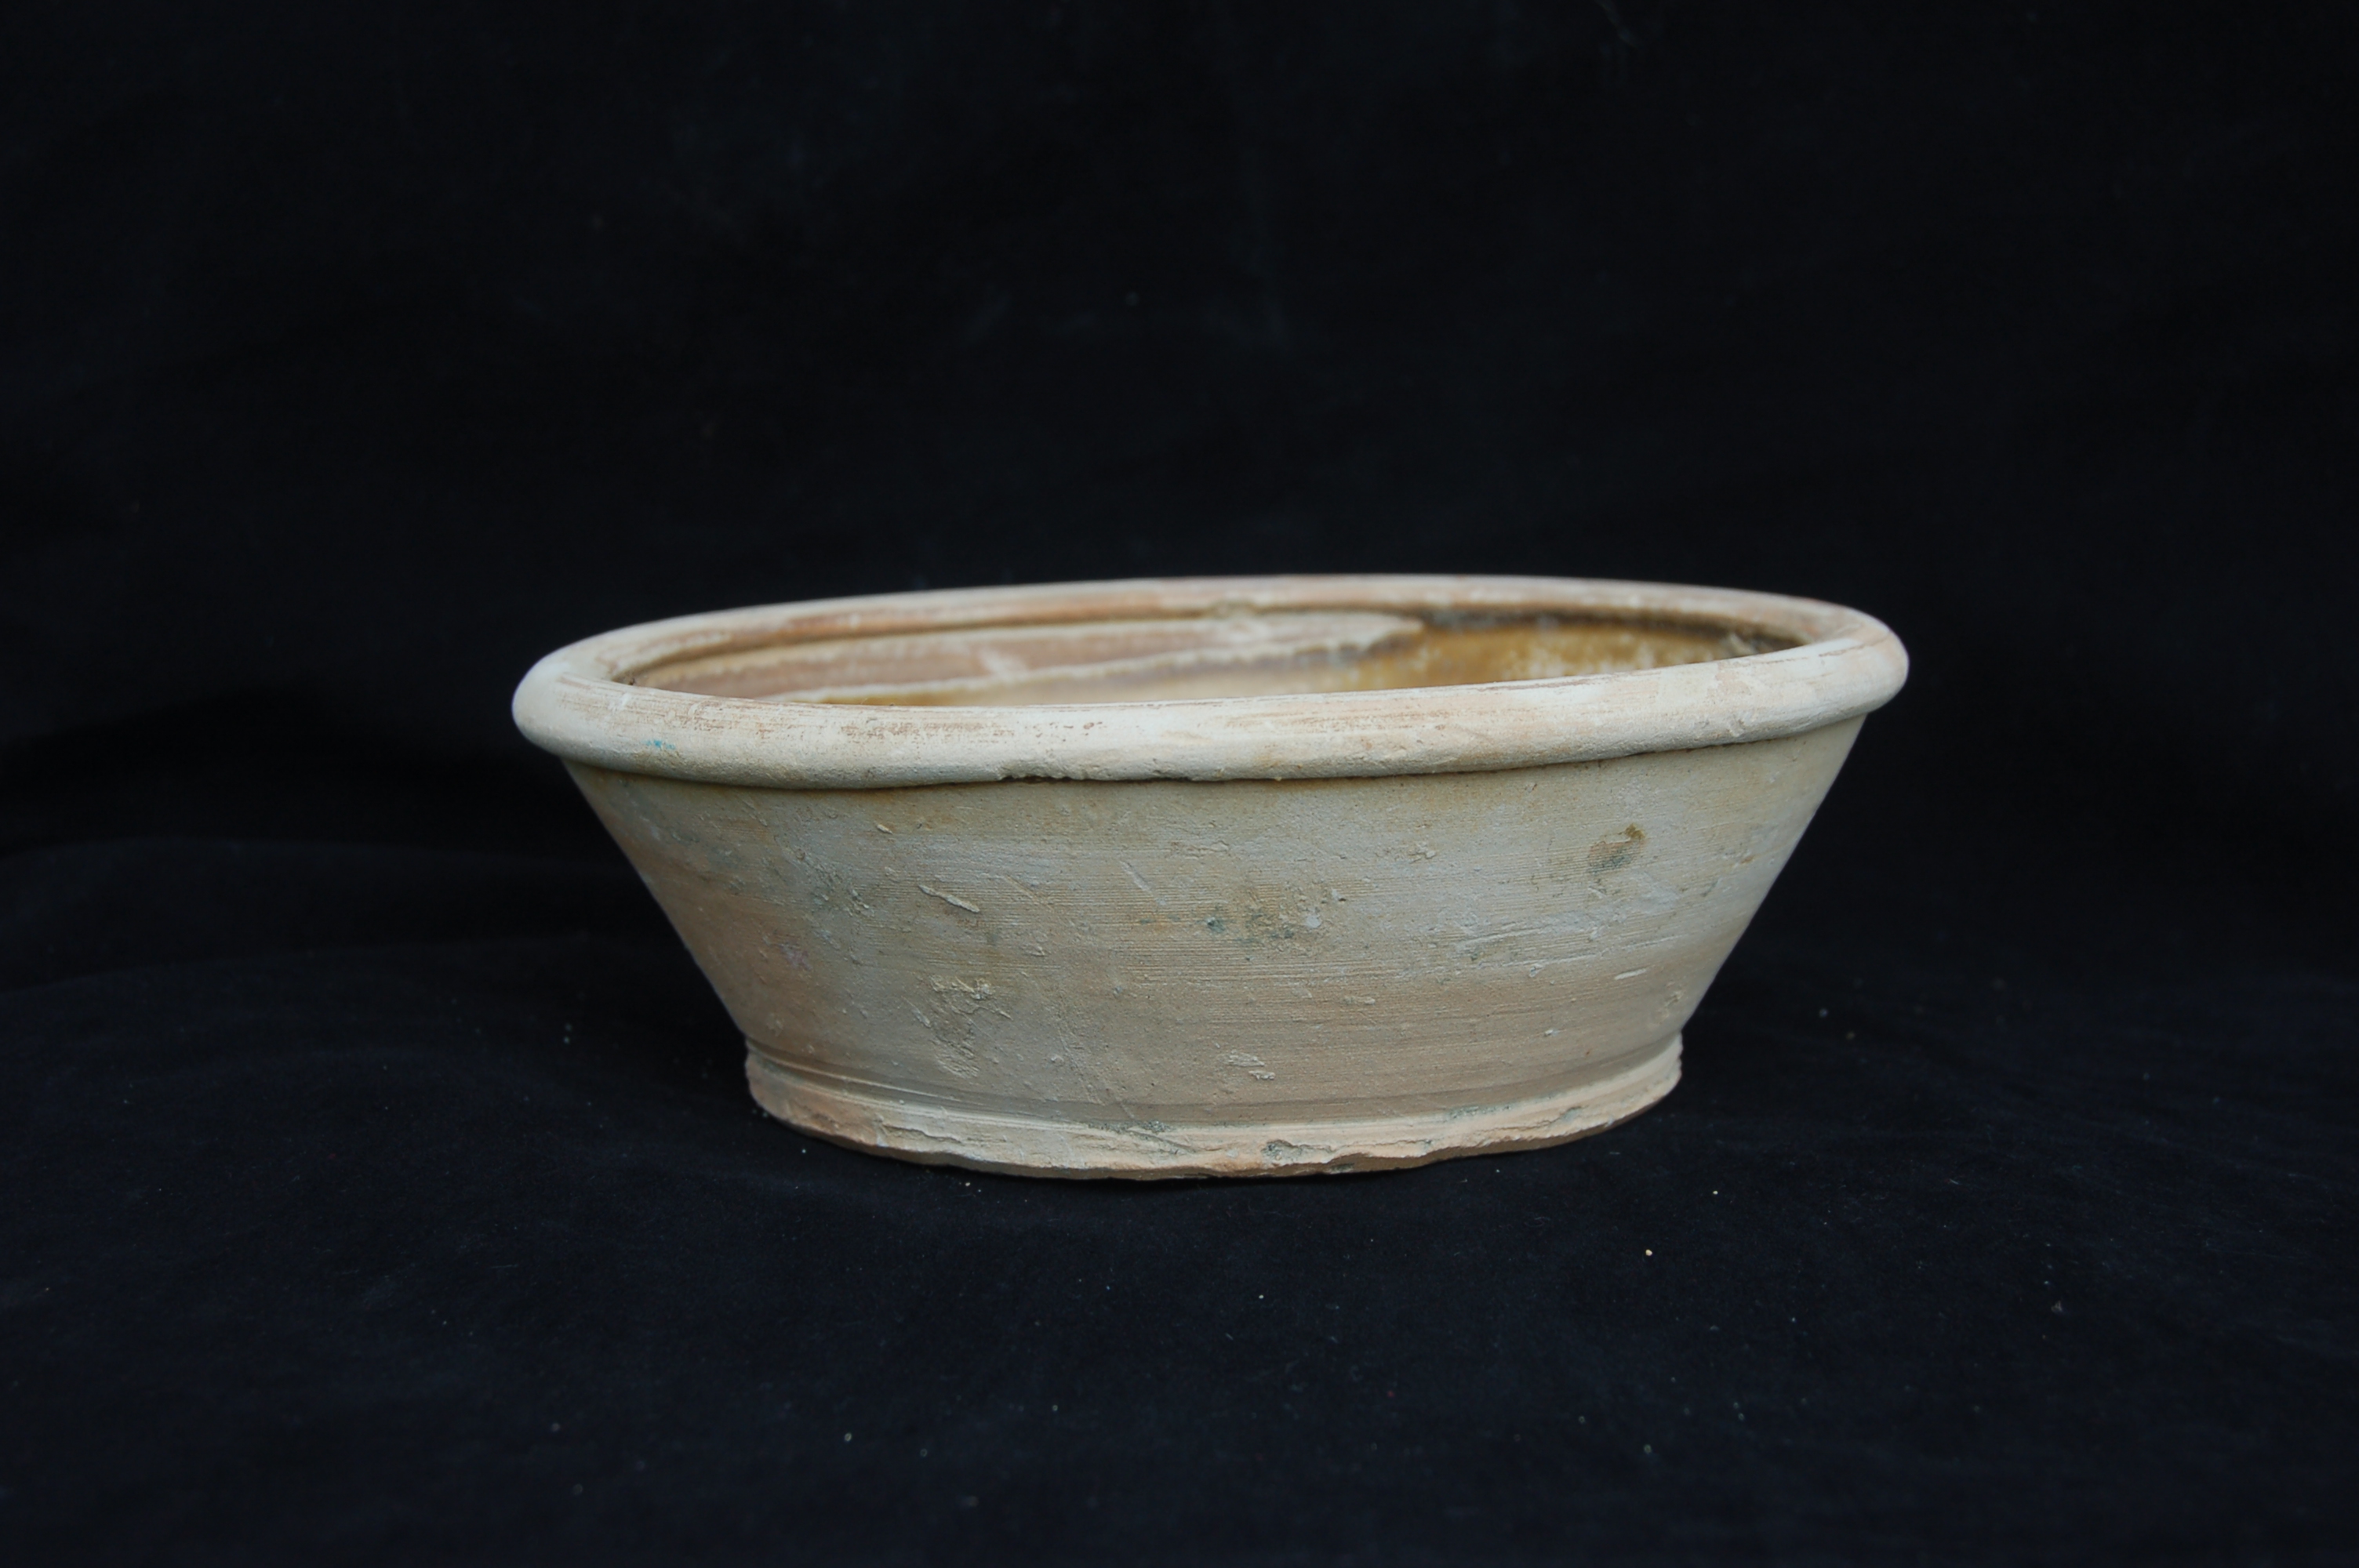 Small basin with olive-green glaze, decorated with an impressed floral motif. It has straight walls with a folded rim, and a flat base. Diameter 20 cm, height 7 cm.